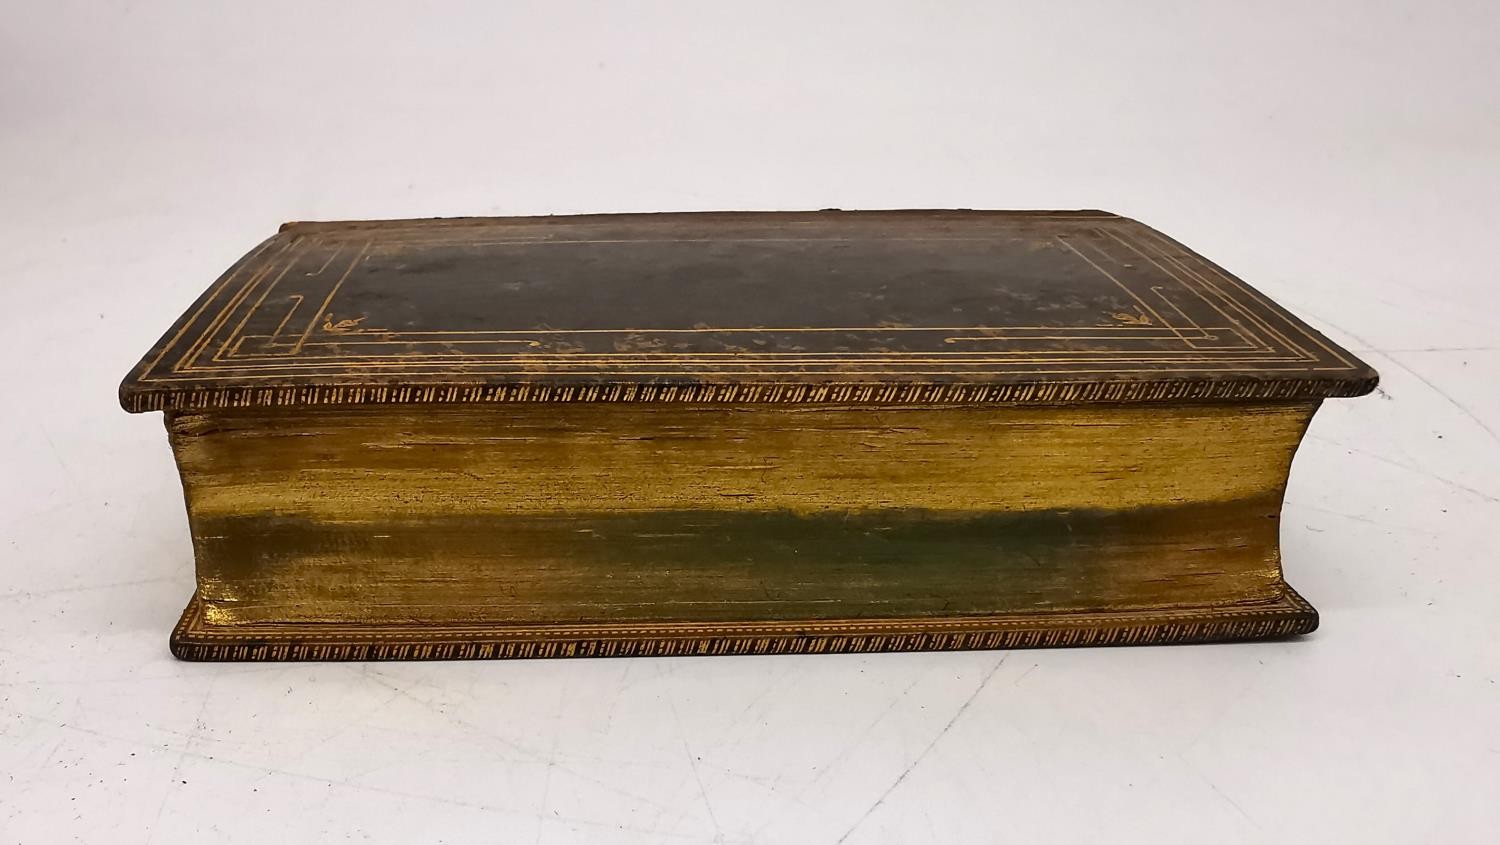 A signed Cartier Ltd. Miniature 'Reference Library' group of Cassell's dictionaries and Philips' - Image 28 of 37